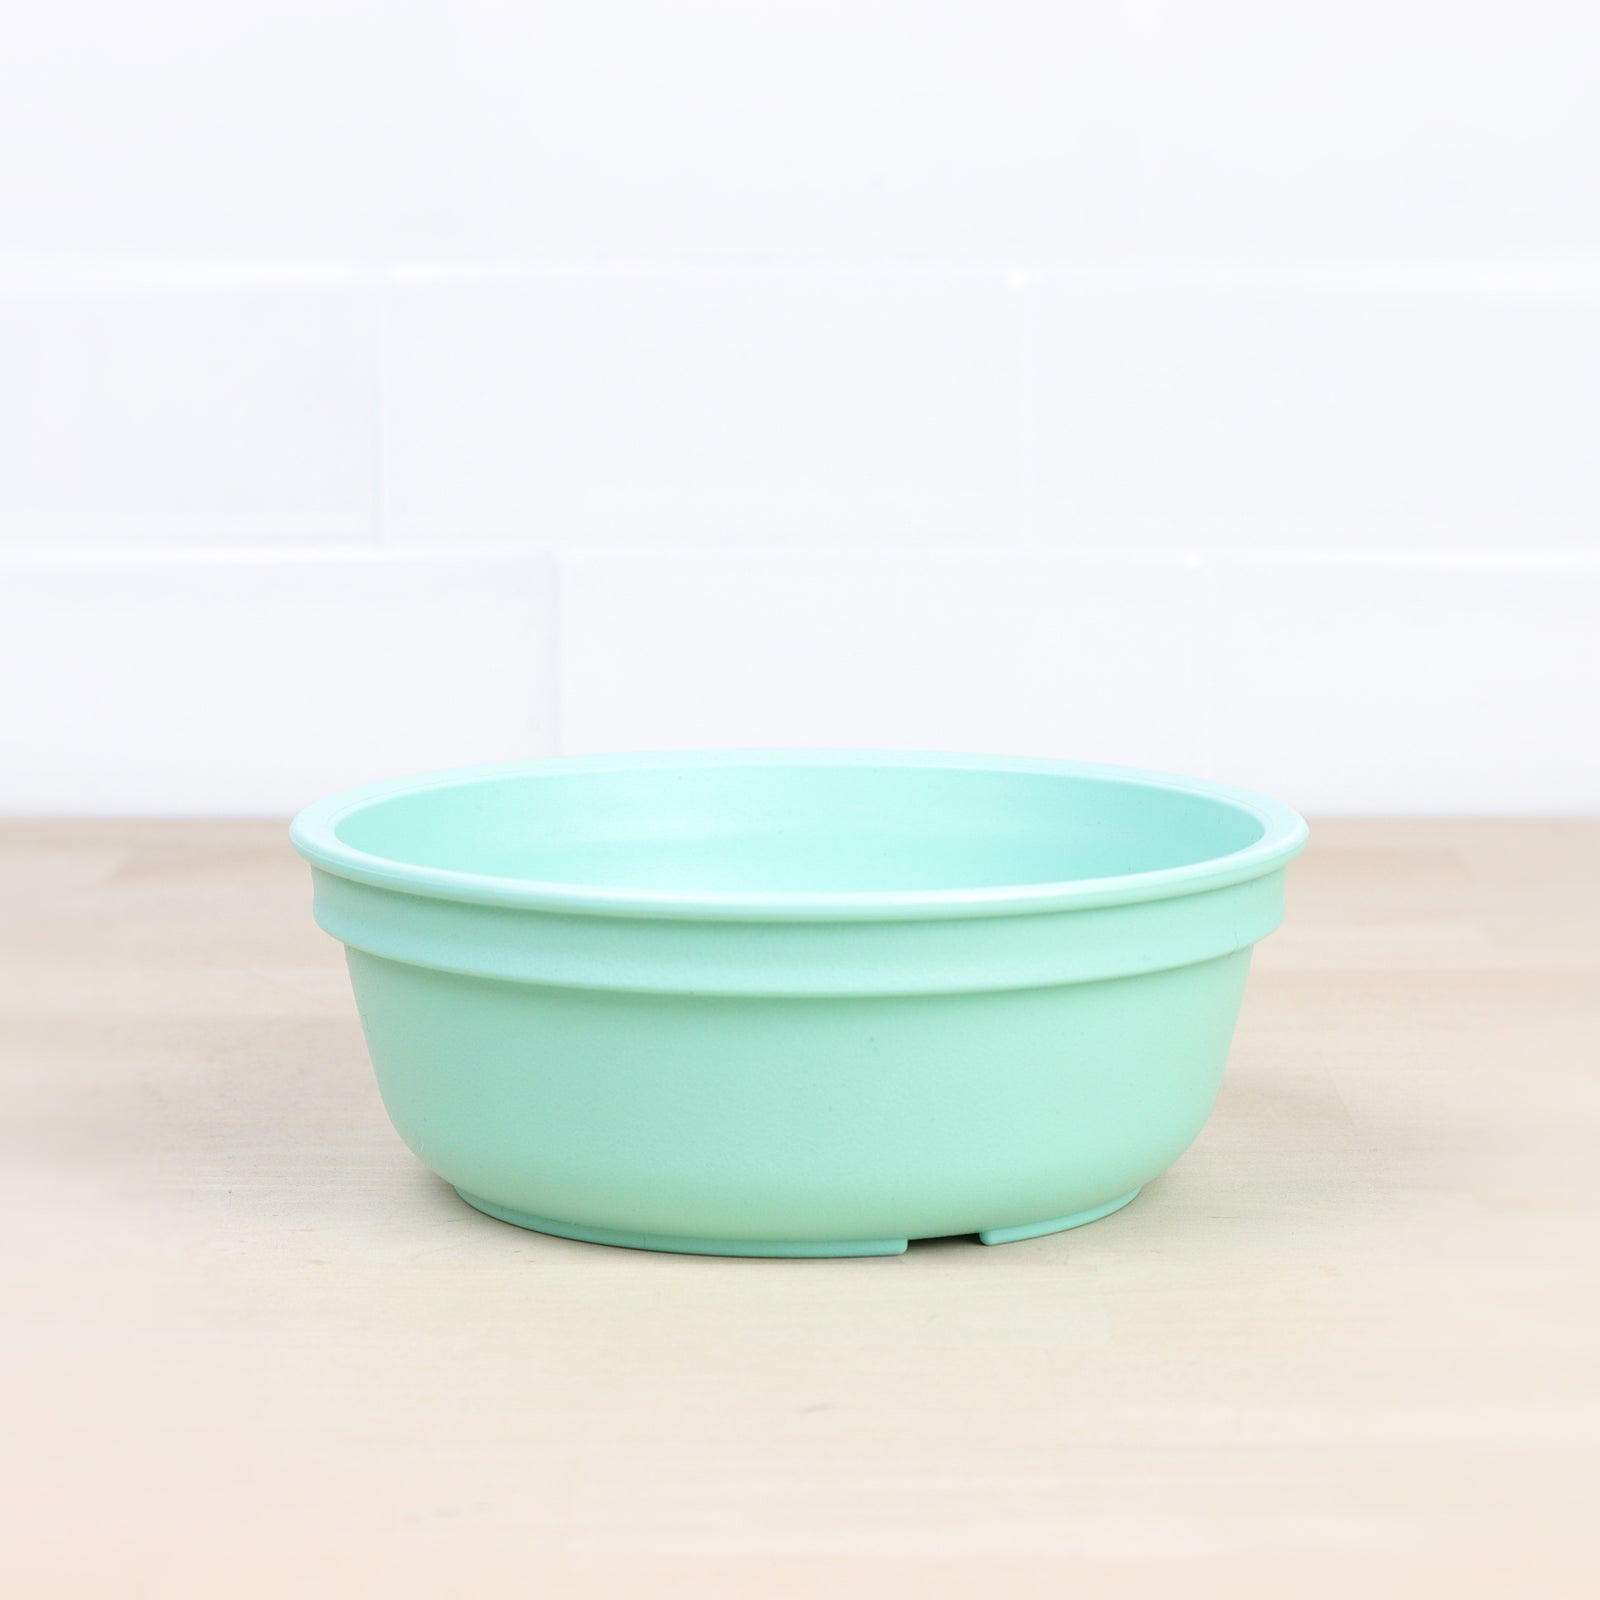 Re-Play Bowl | Standard Size in Mint from Bear & Moo